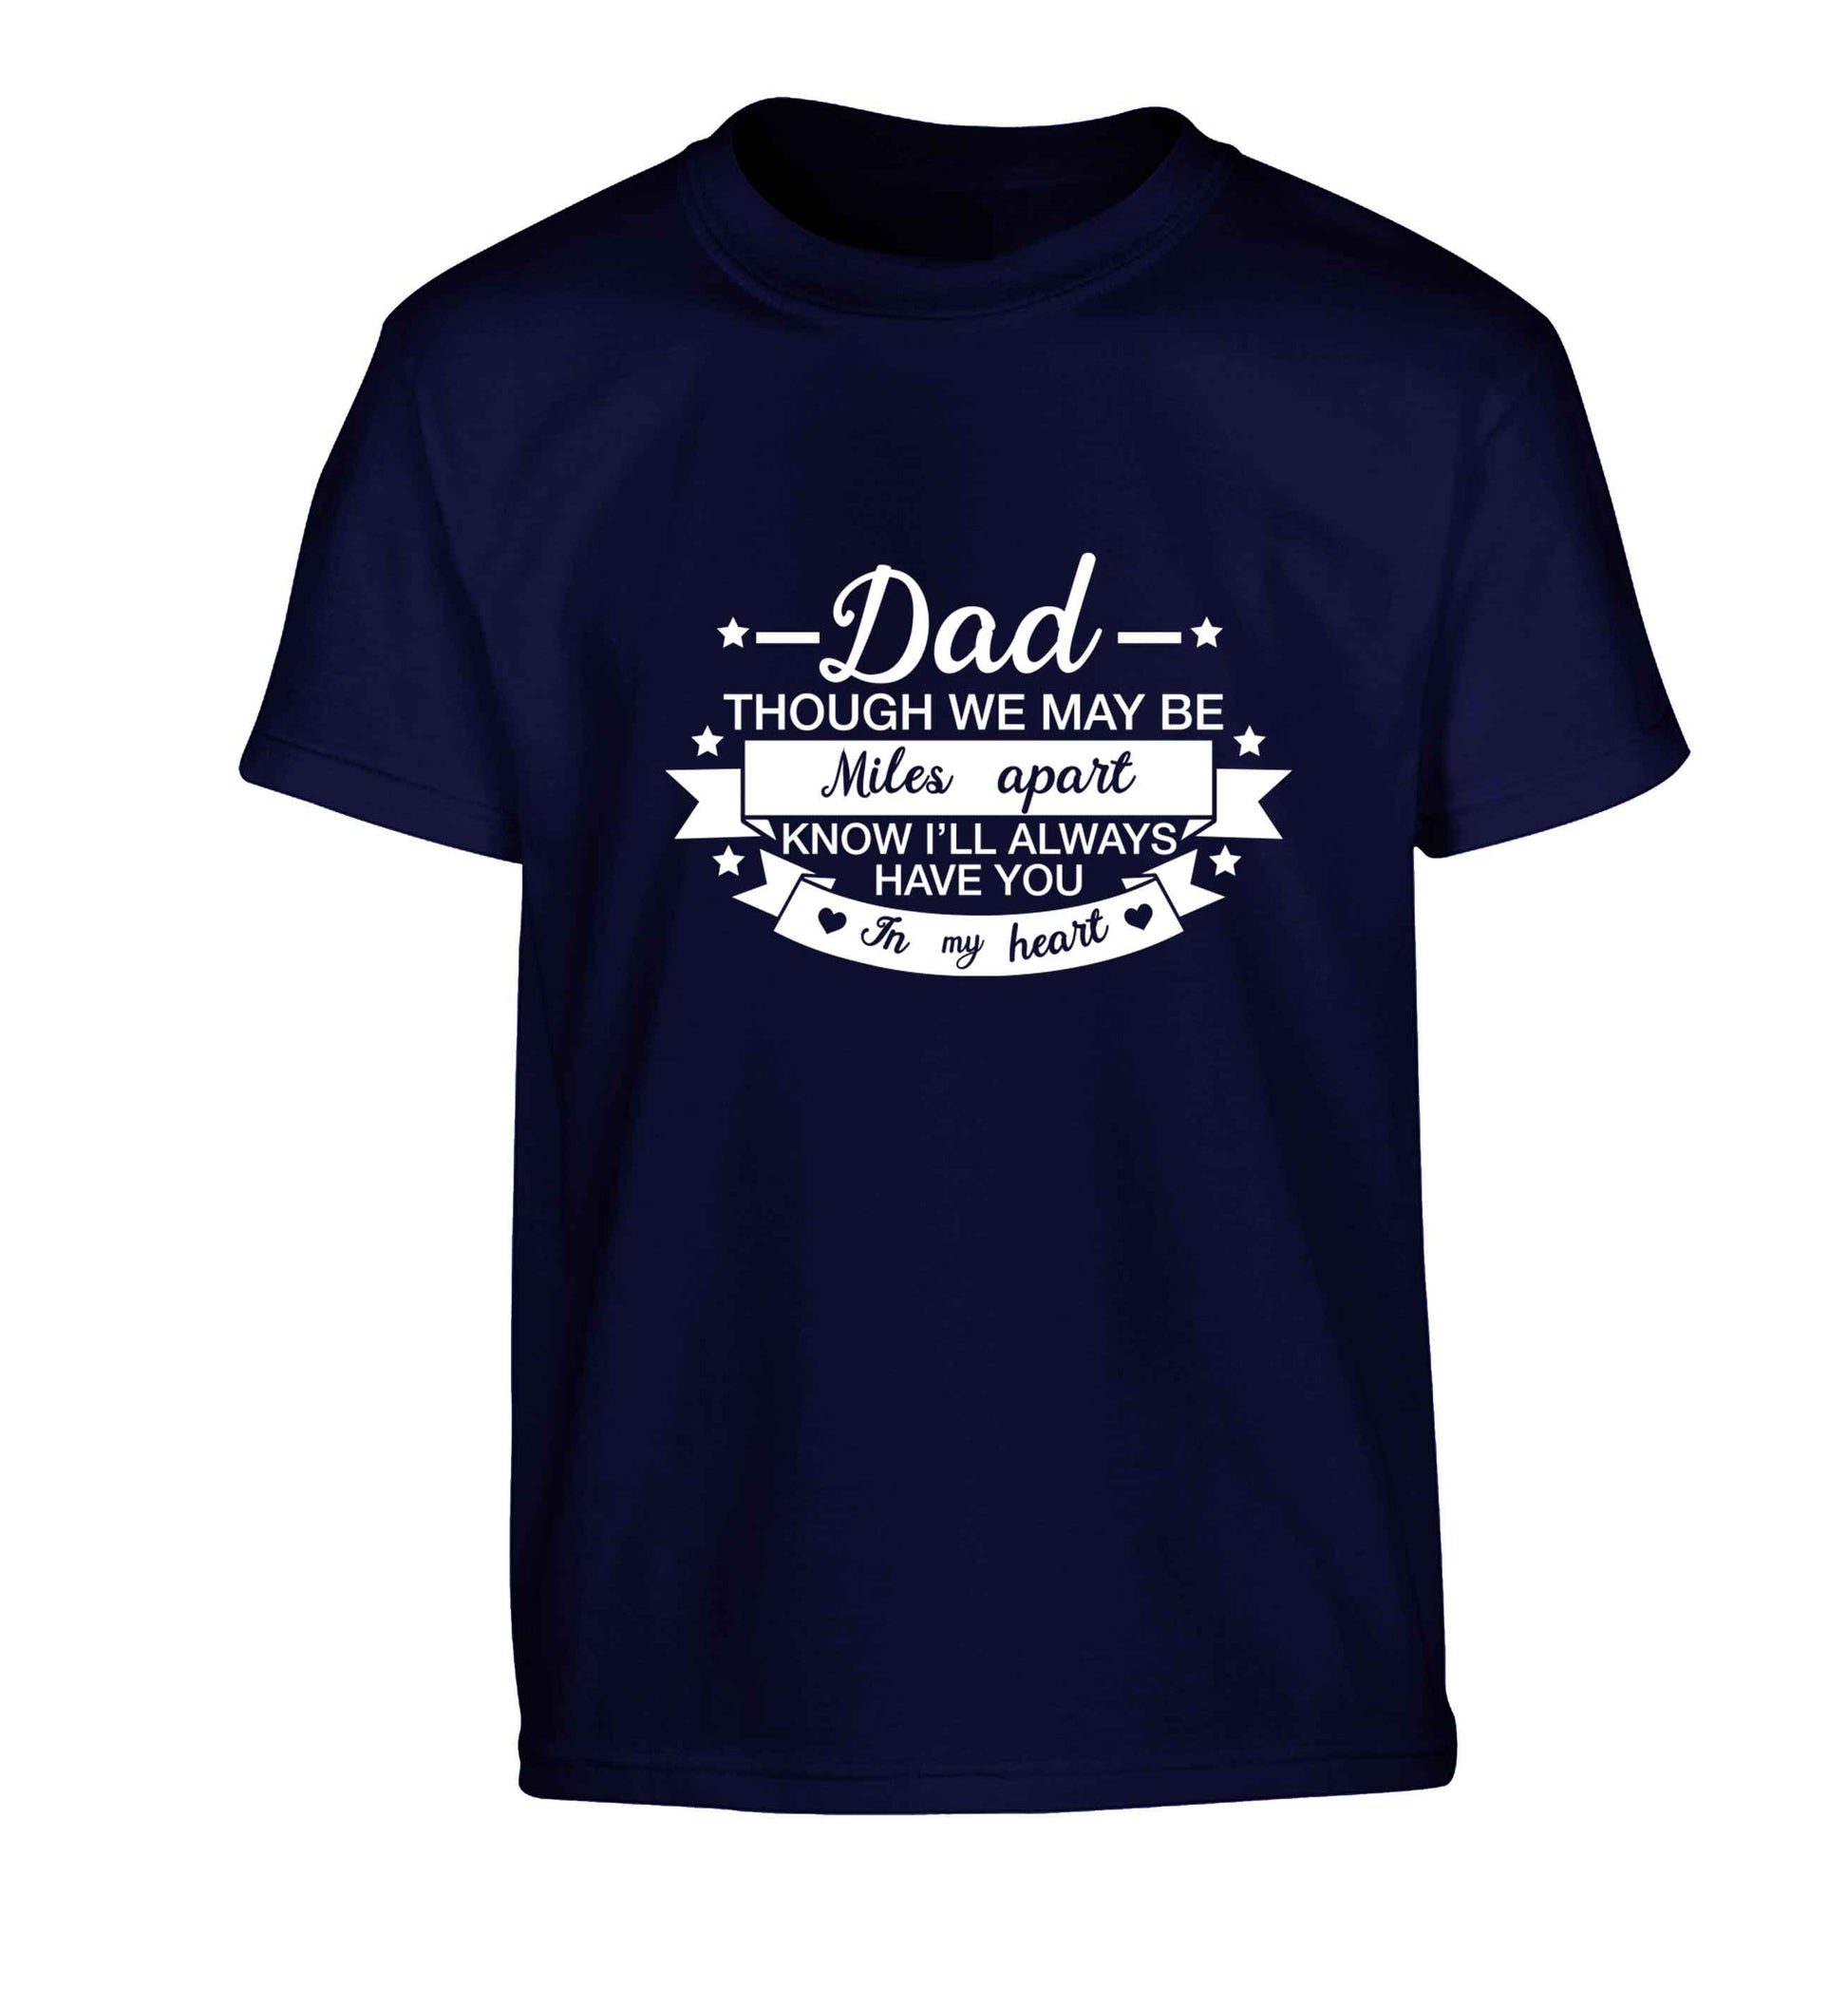 Dad though we are miles apart know I'll always have you in my heart Children's navy Tshirt 12-13 Years